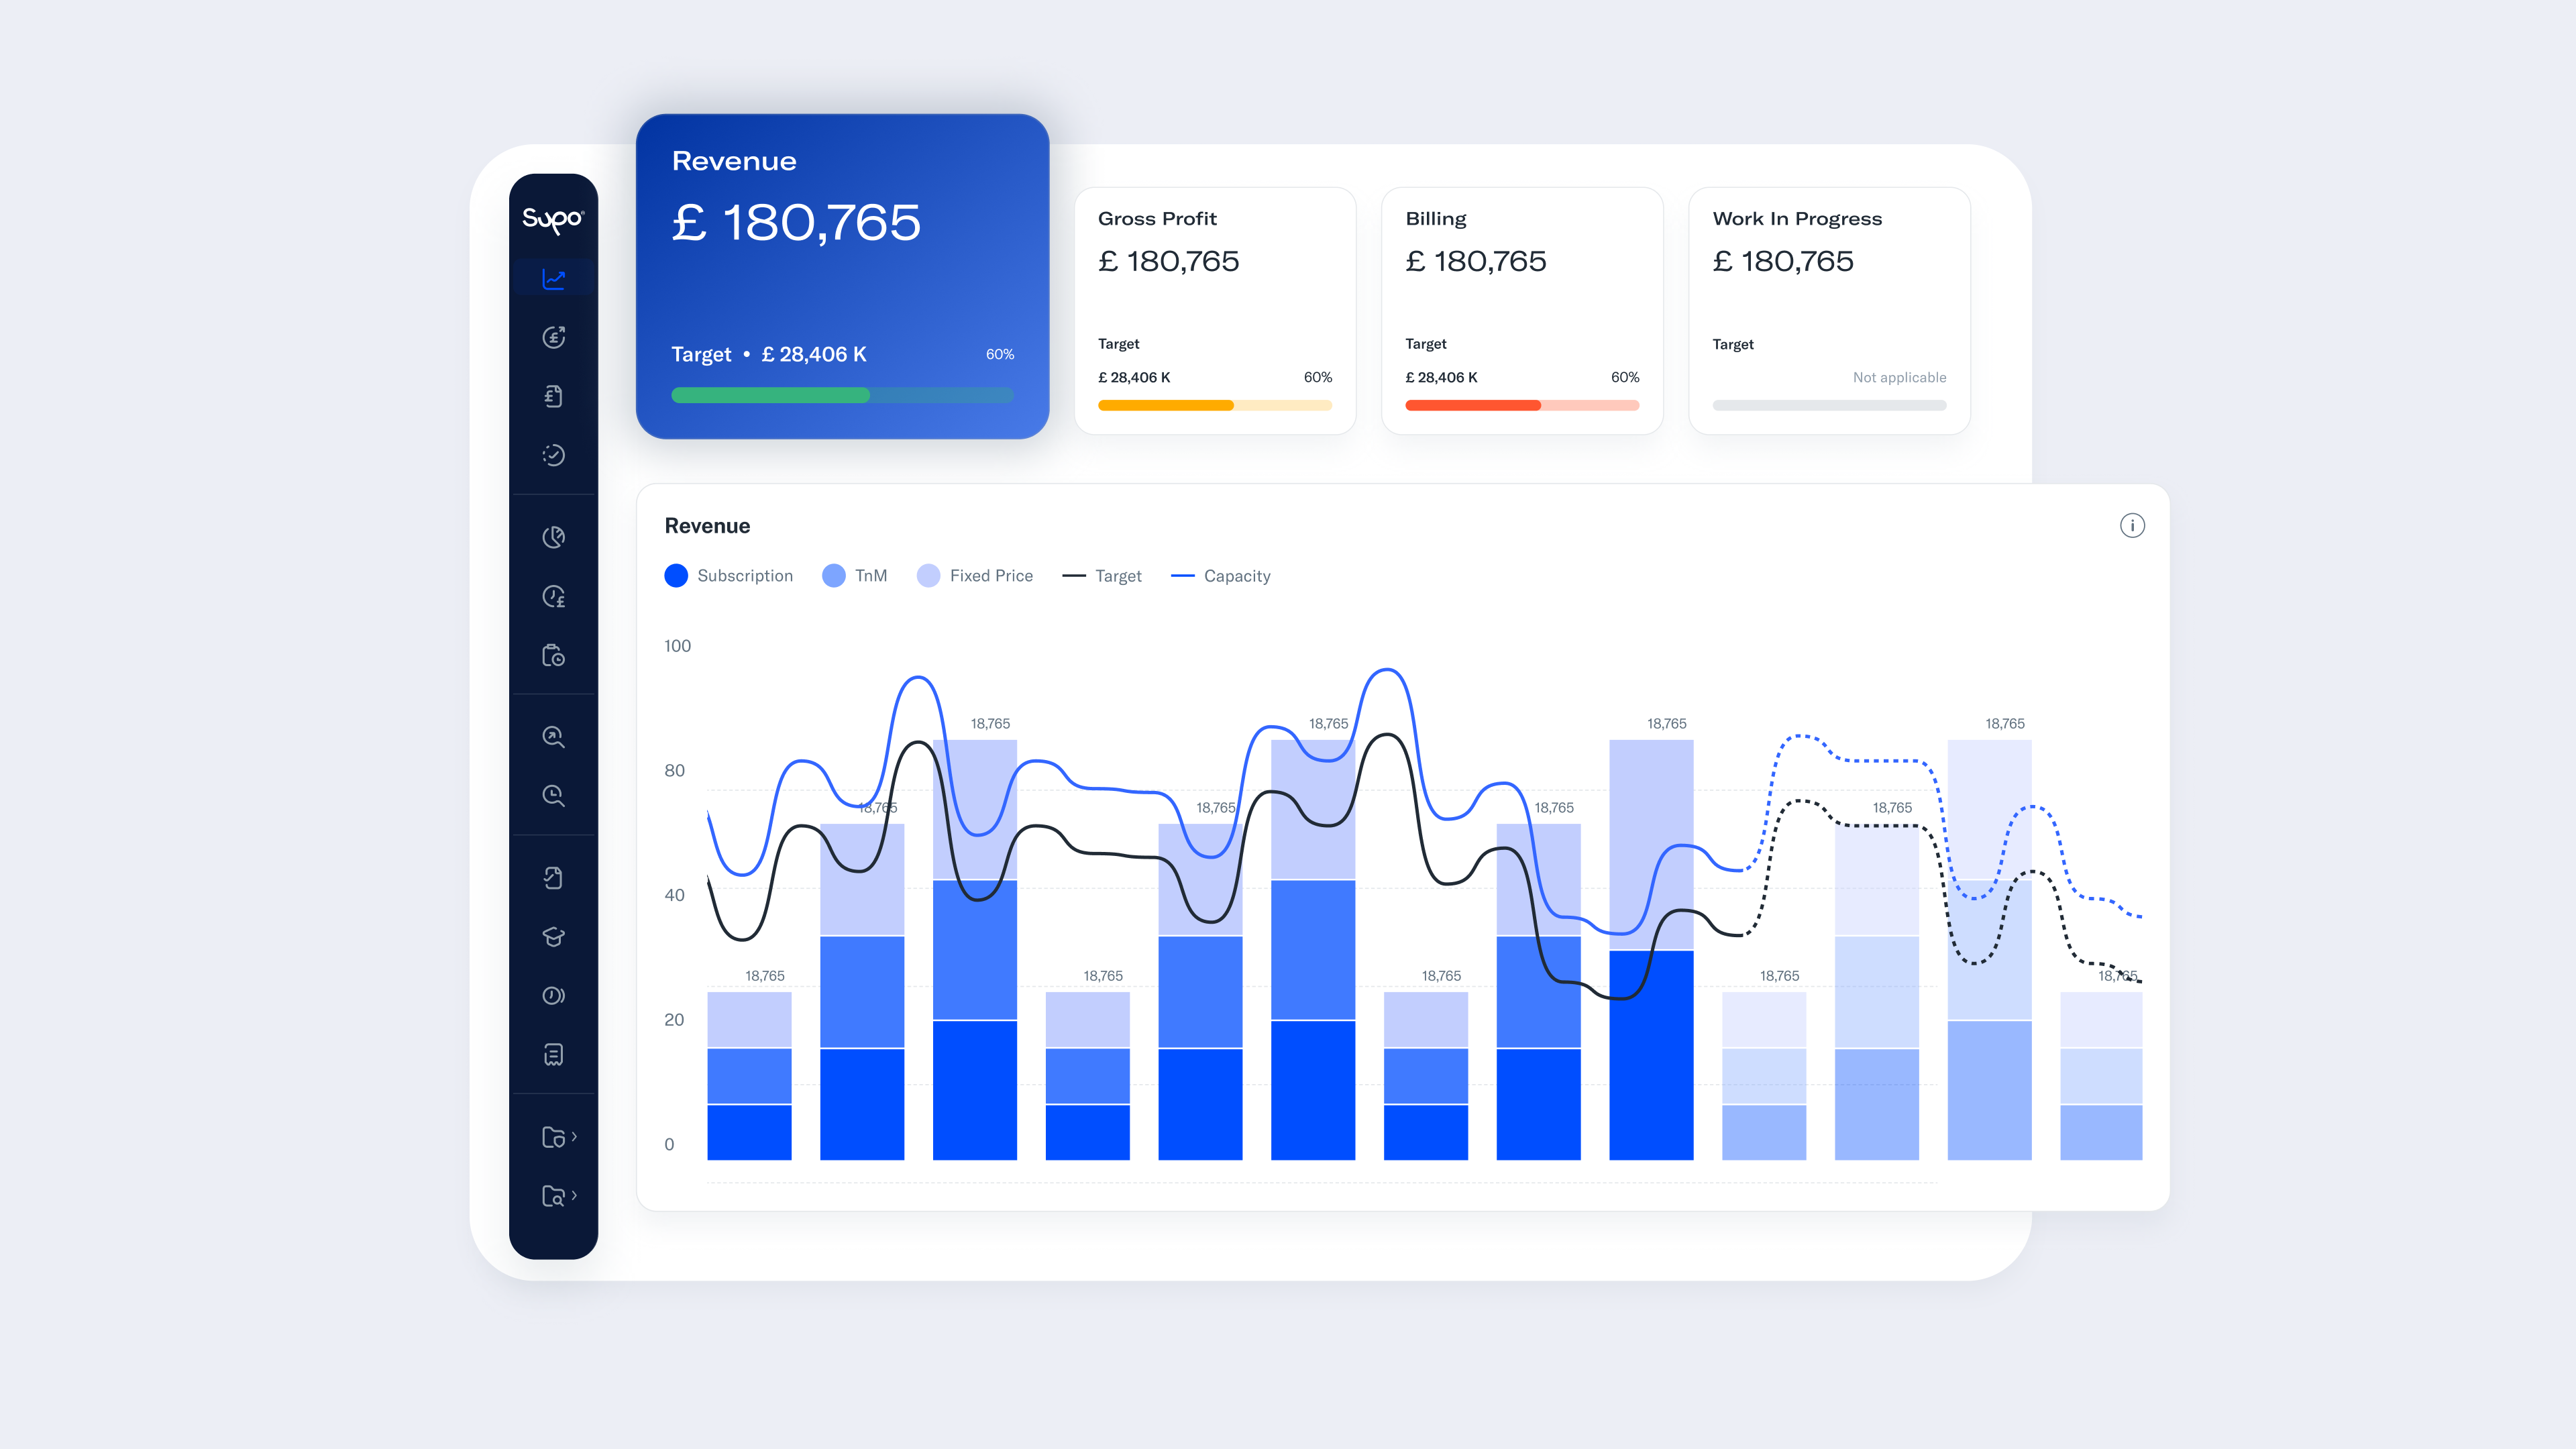 Track revenue growth, contract profitability, billing, and WIP in one dashboard.